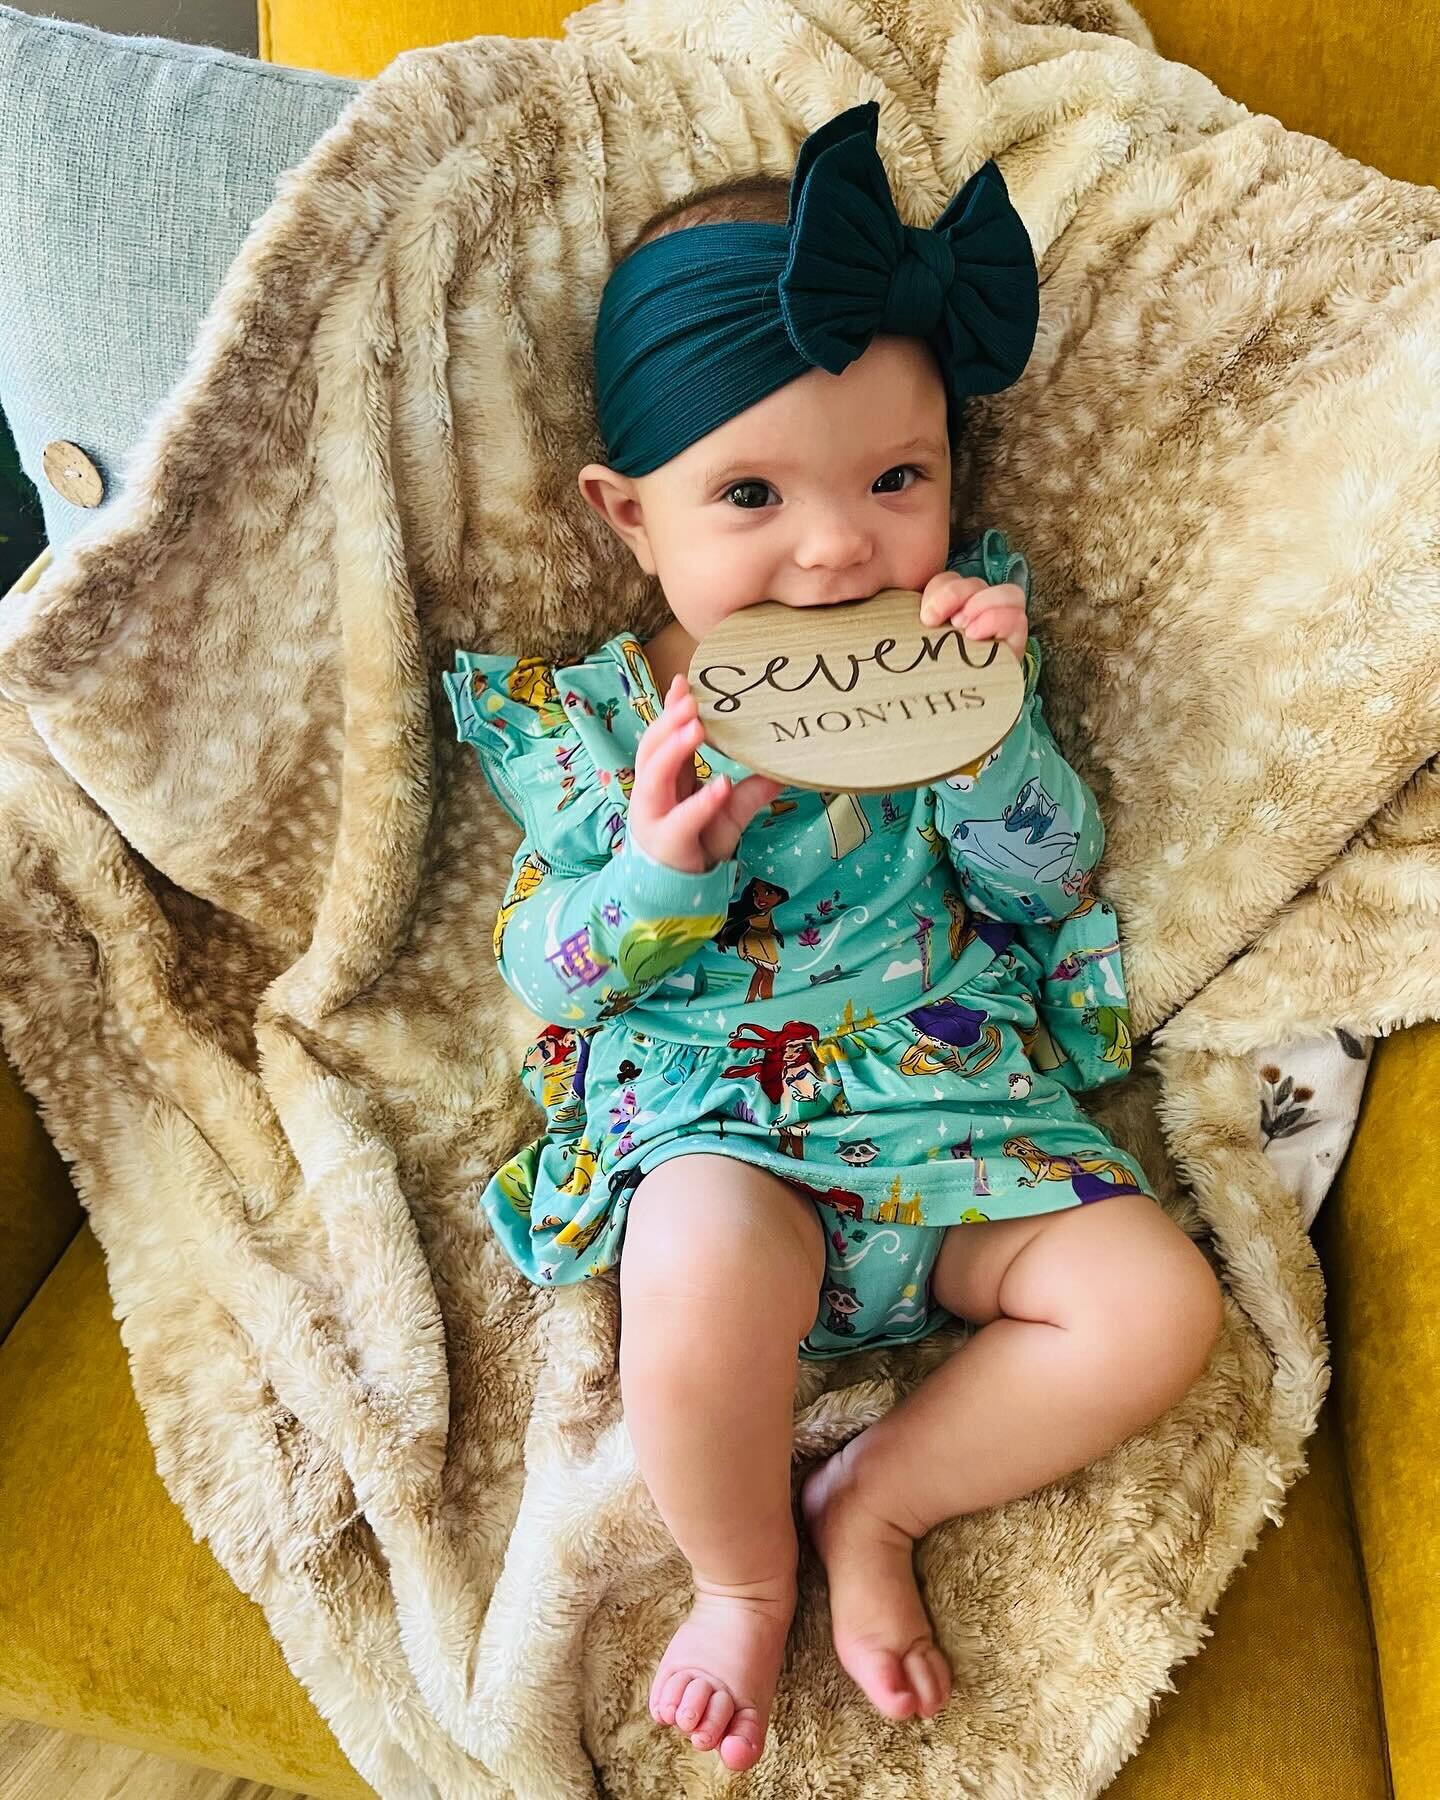 Princess Louisa James turned 7mo on 2/5! This month has brought so much more wiggling, rolling &amp; &ldquo;talking&rdquo;. She loves eating her own toes, blowing bubbles, and petting her favorite kitty, Luna. Her whole face lights up when she smiles